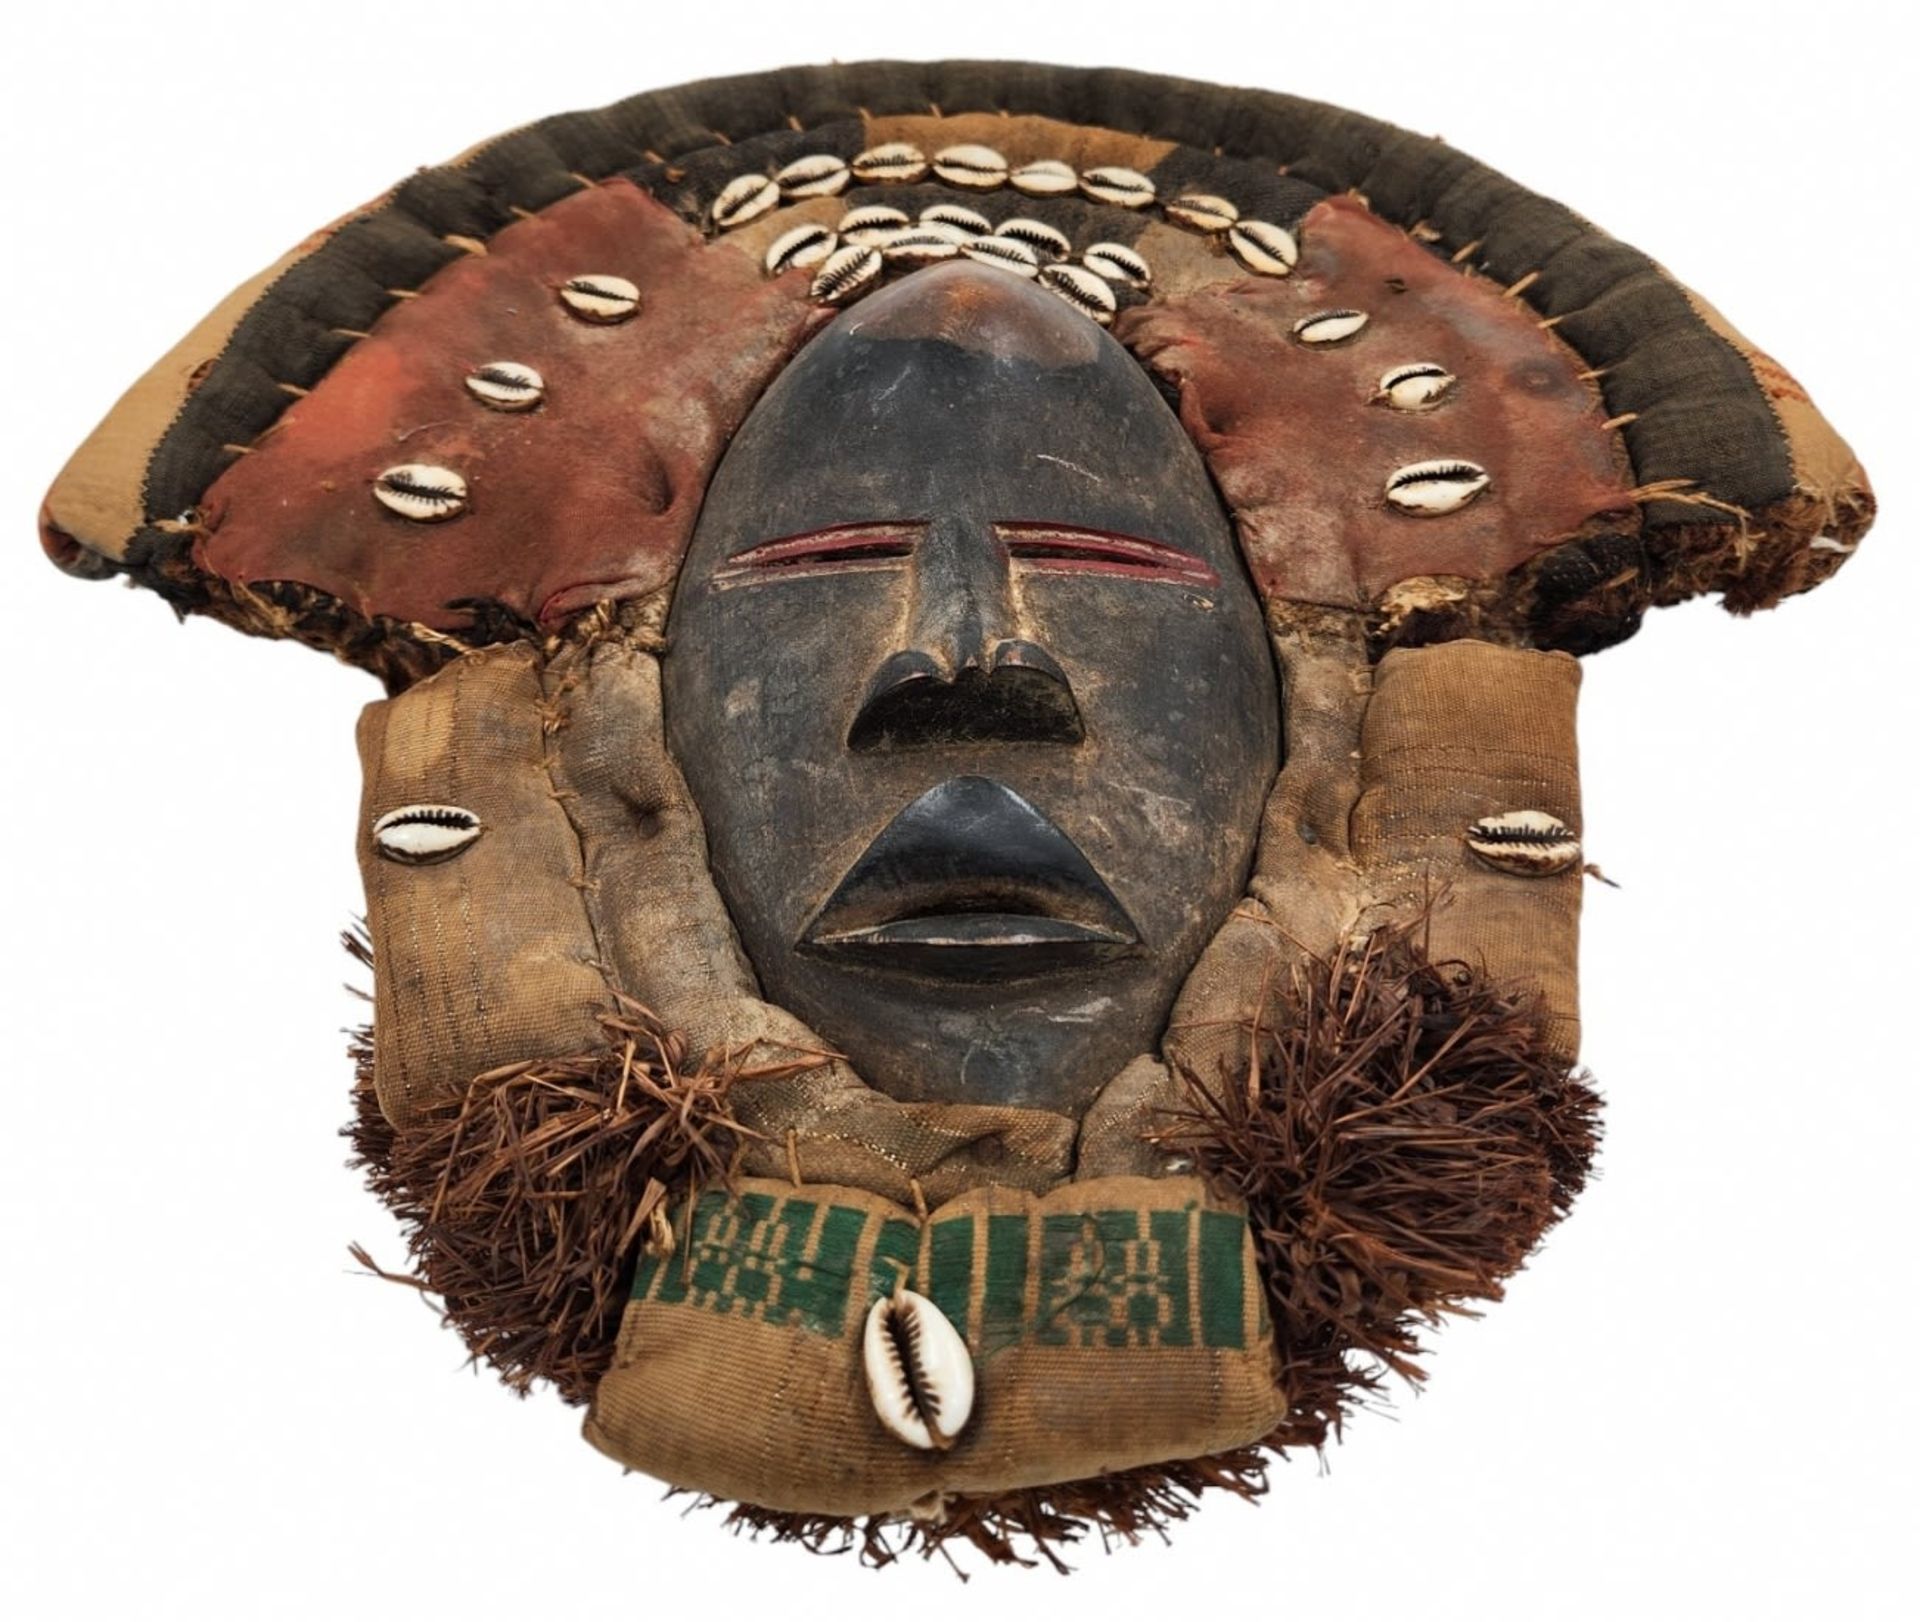 Antique African mask - Dan People, made of wood, fabric, raffia and shells, approximately 1920-1930, - Image 3 of 3